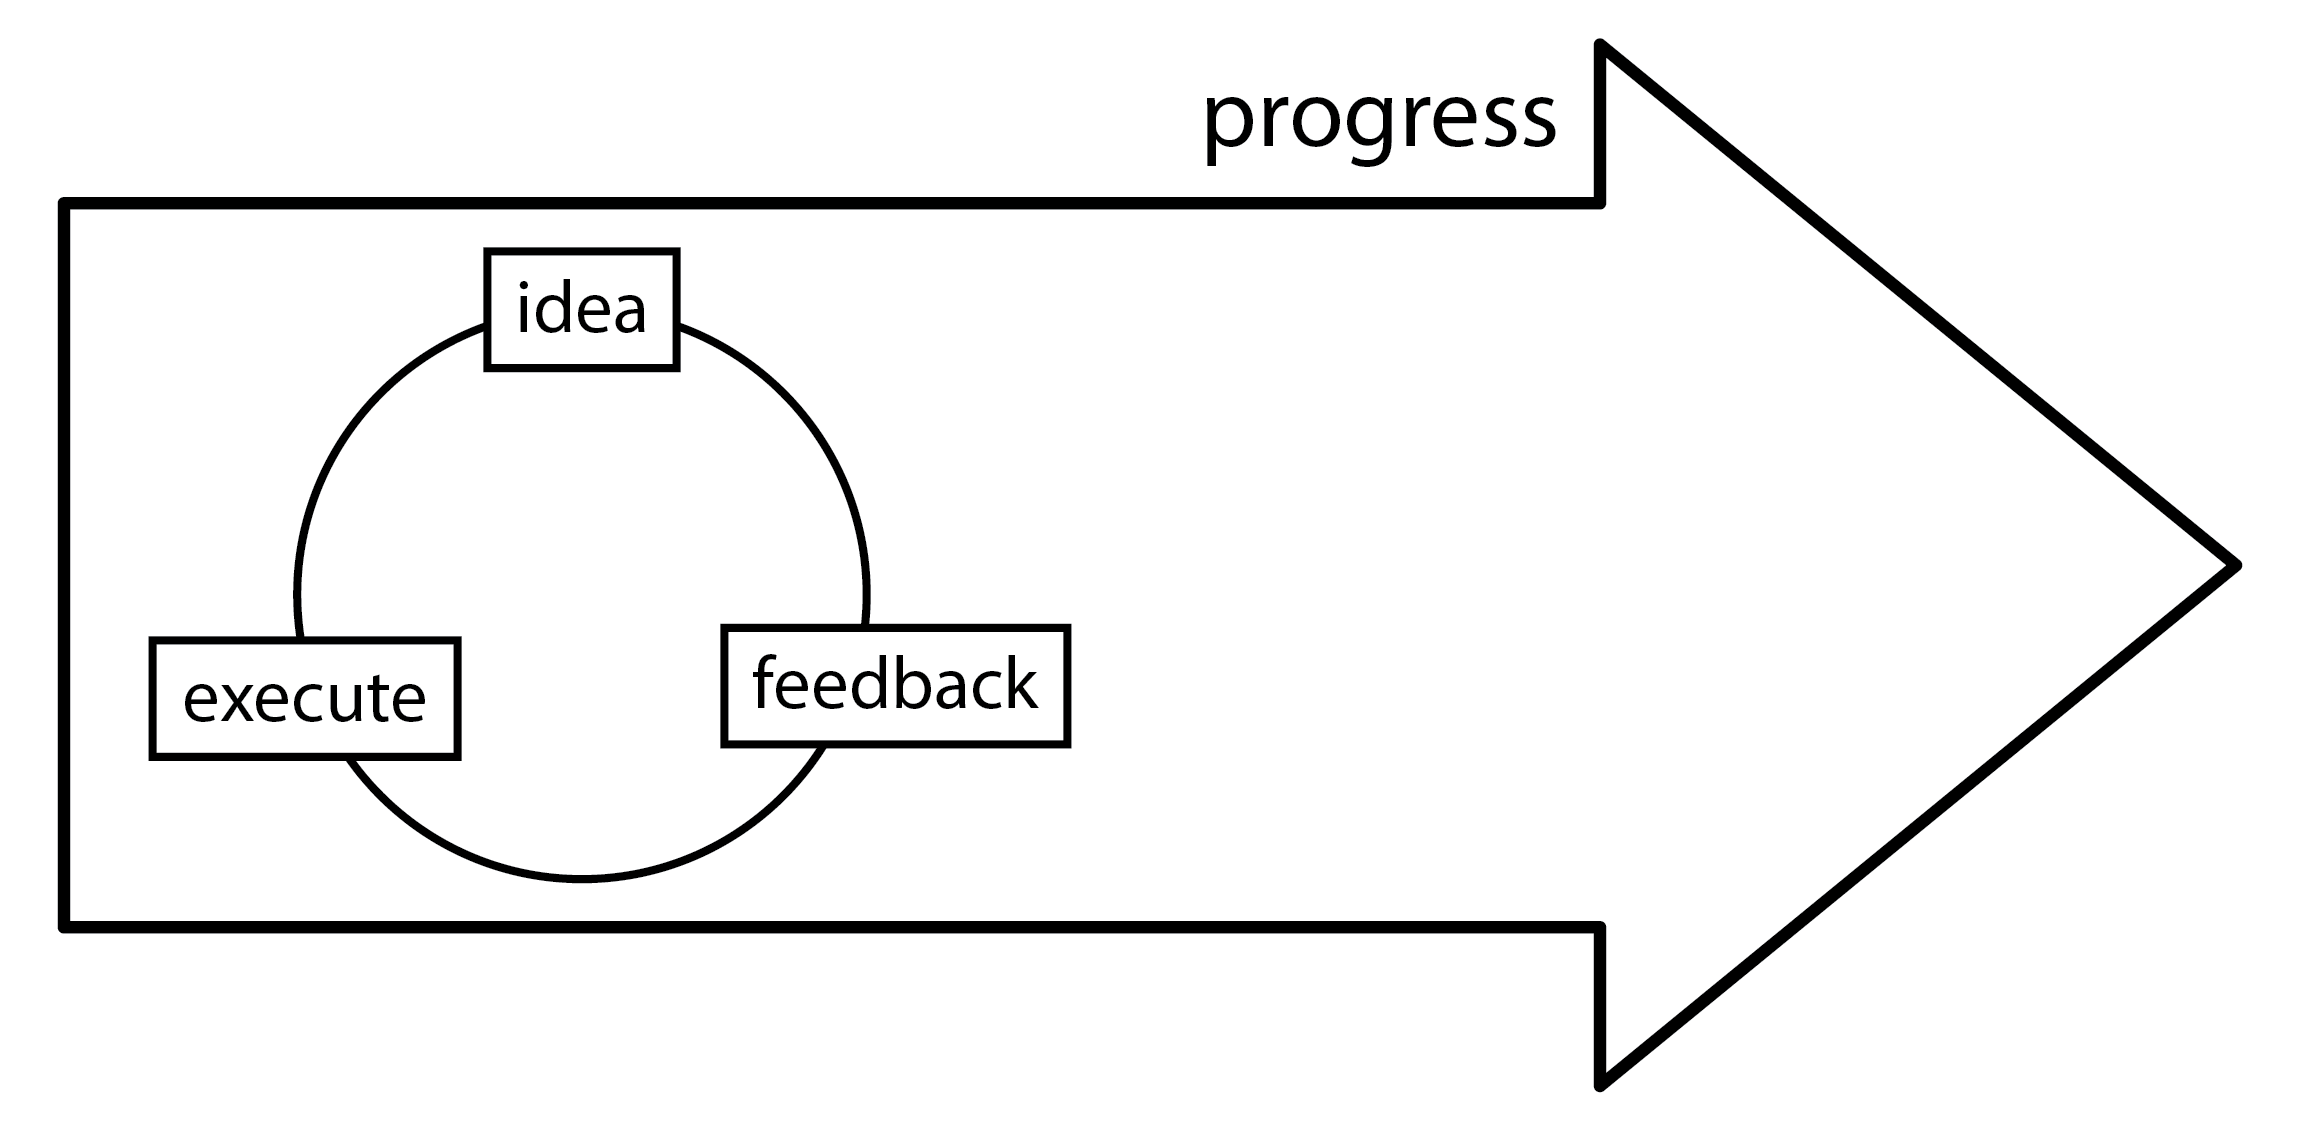 Progress comes from iteration, execution, and feedback. "Failure" (also known as "negative feedback") should be expected.